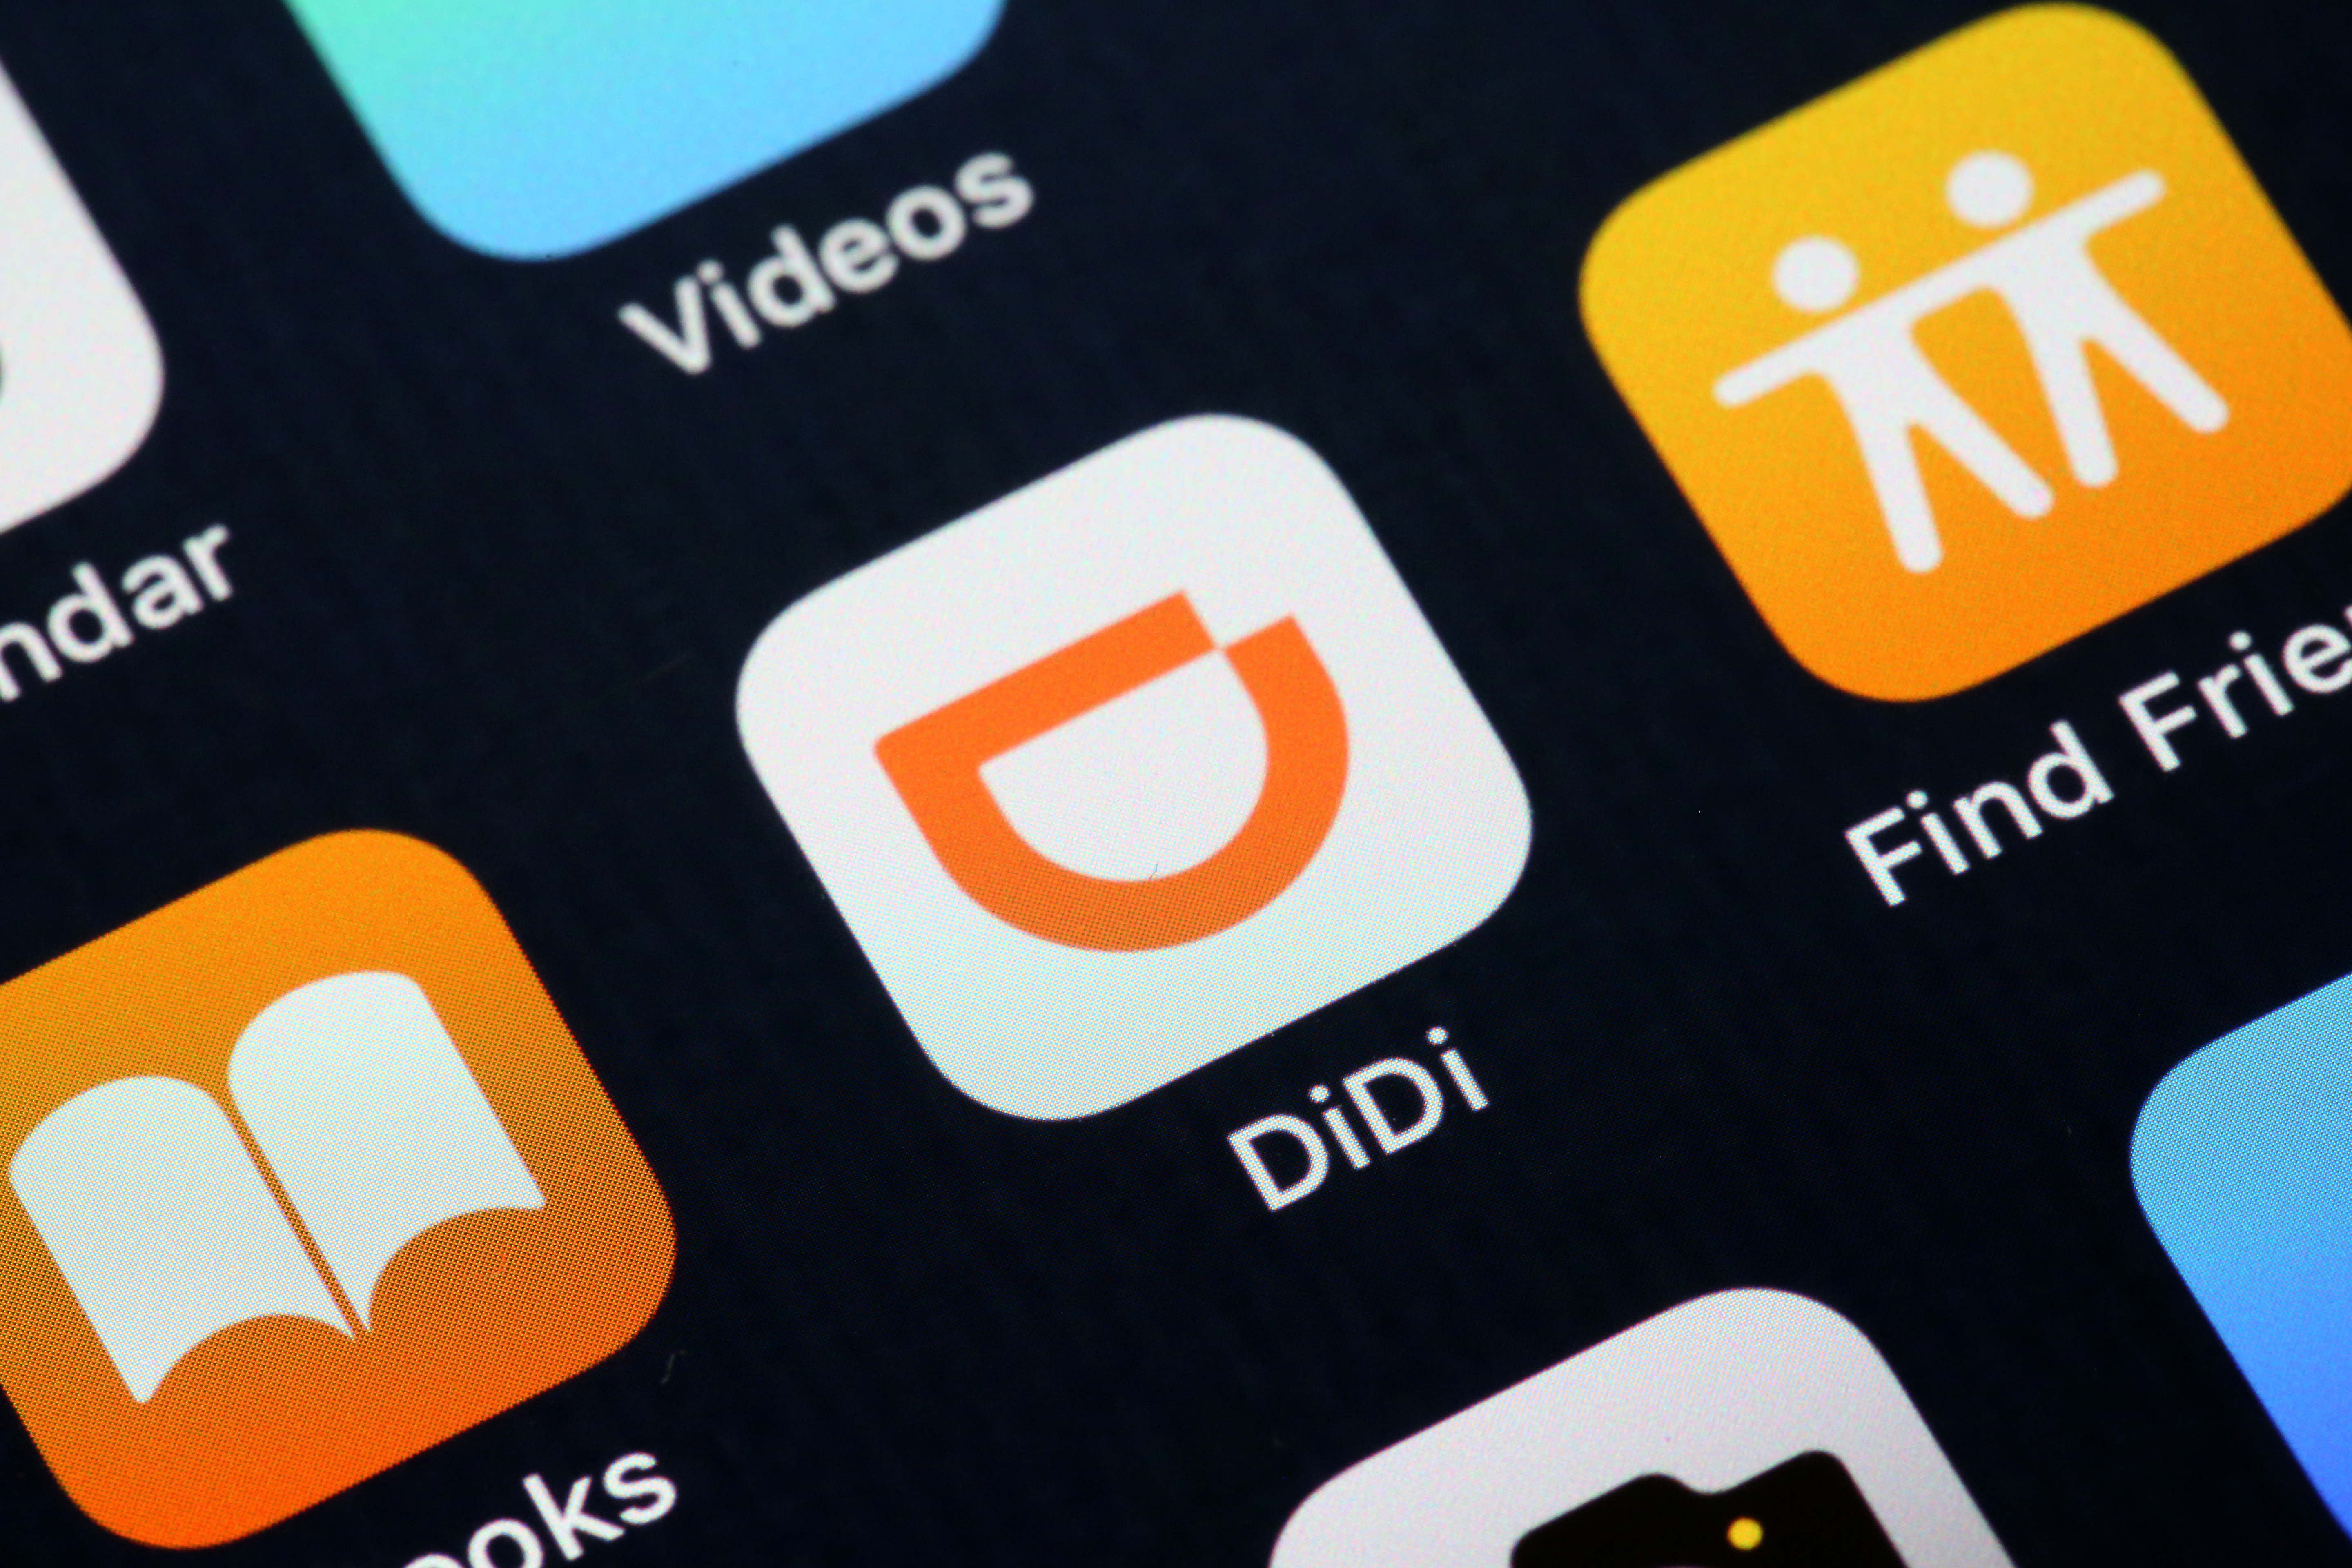 Didi faces an uphill battle alongside its global expansion plans